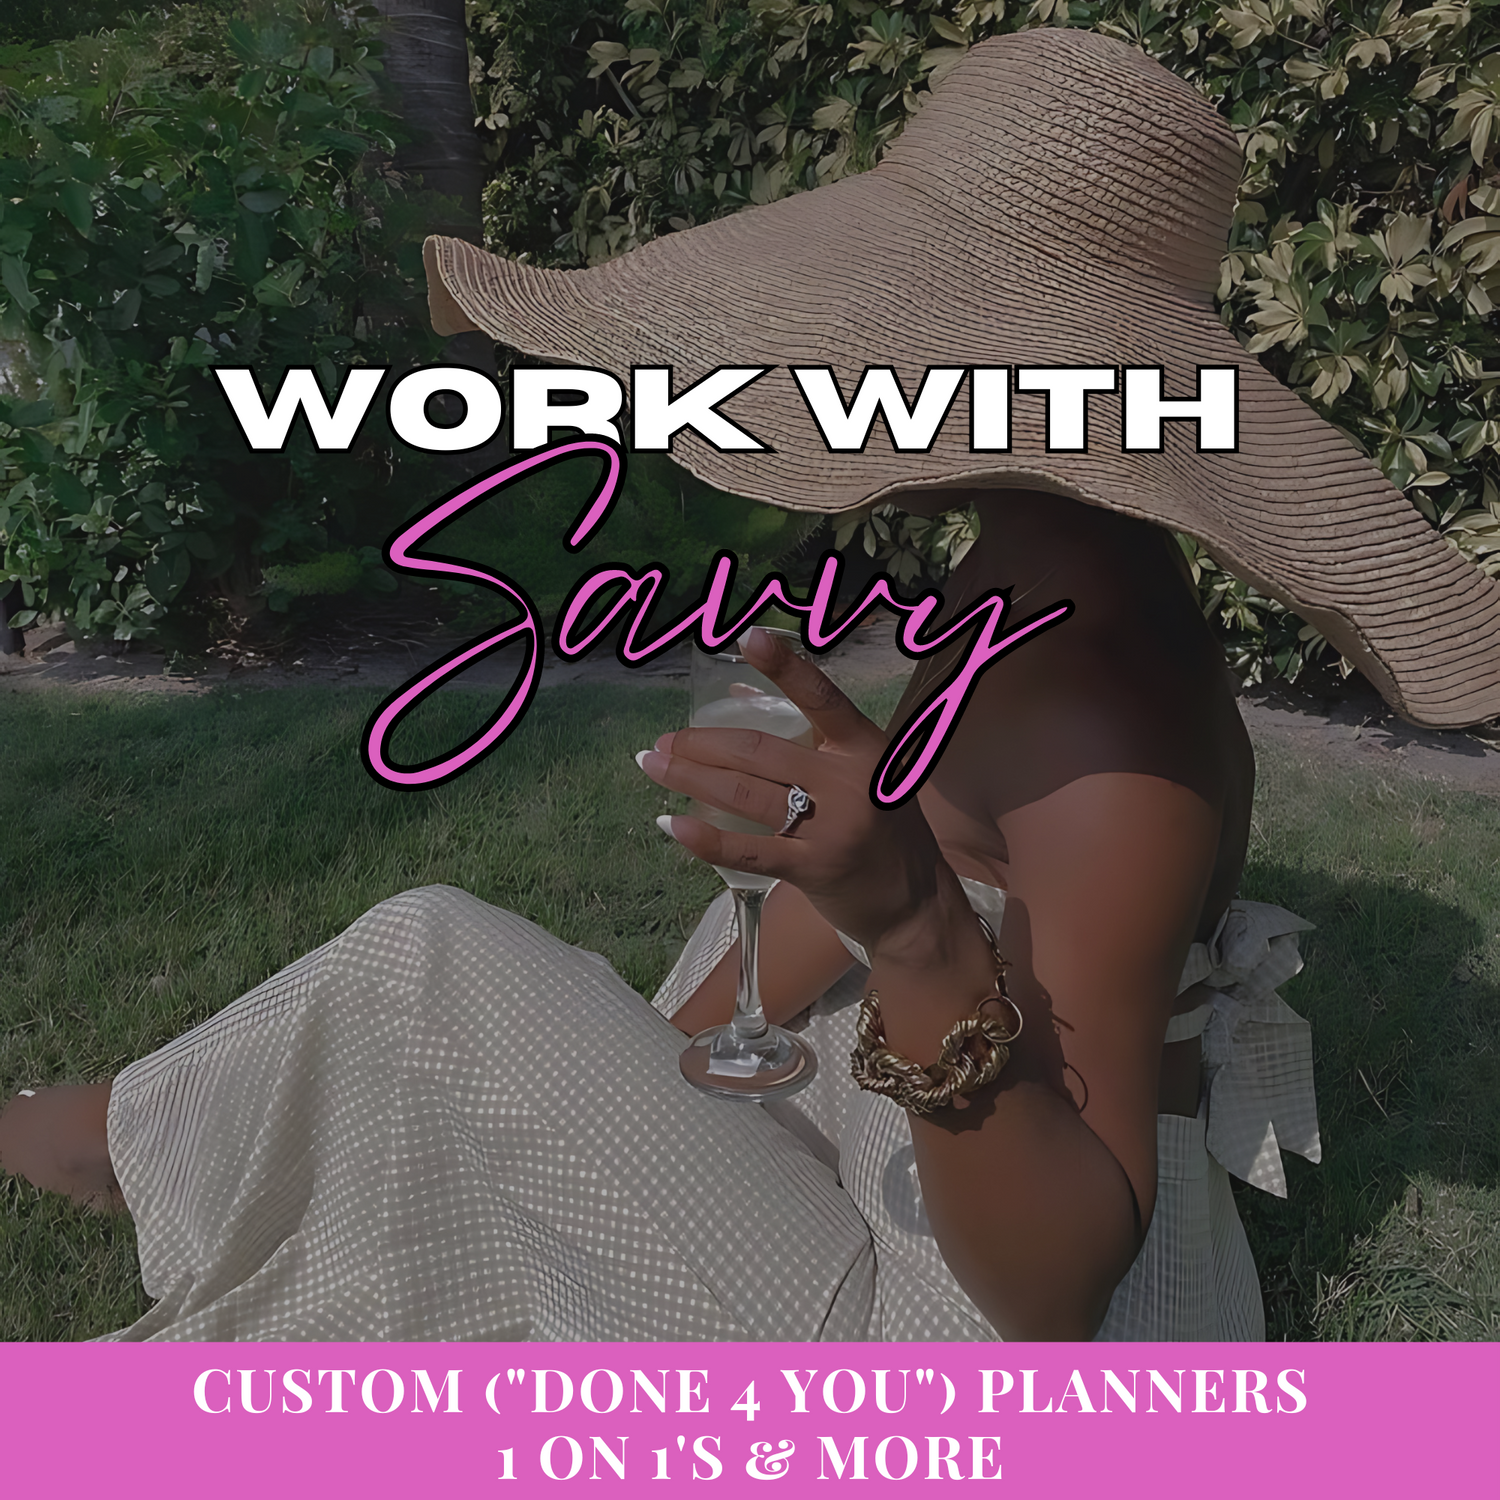 Work With Savvy